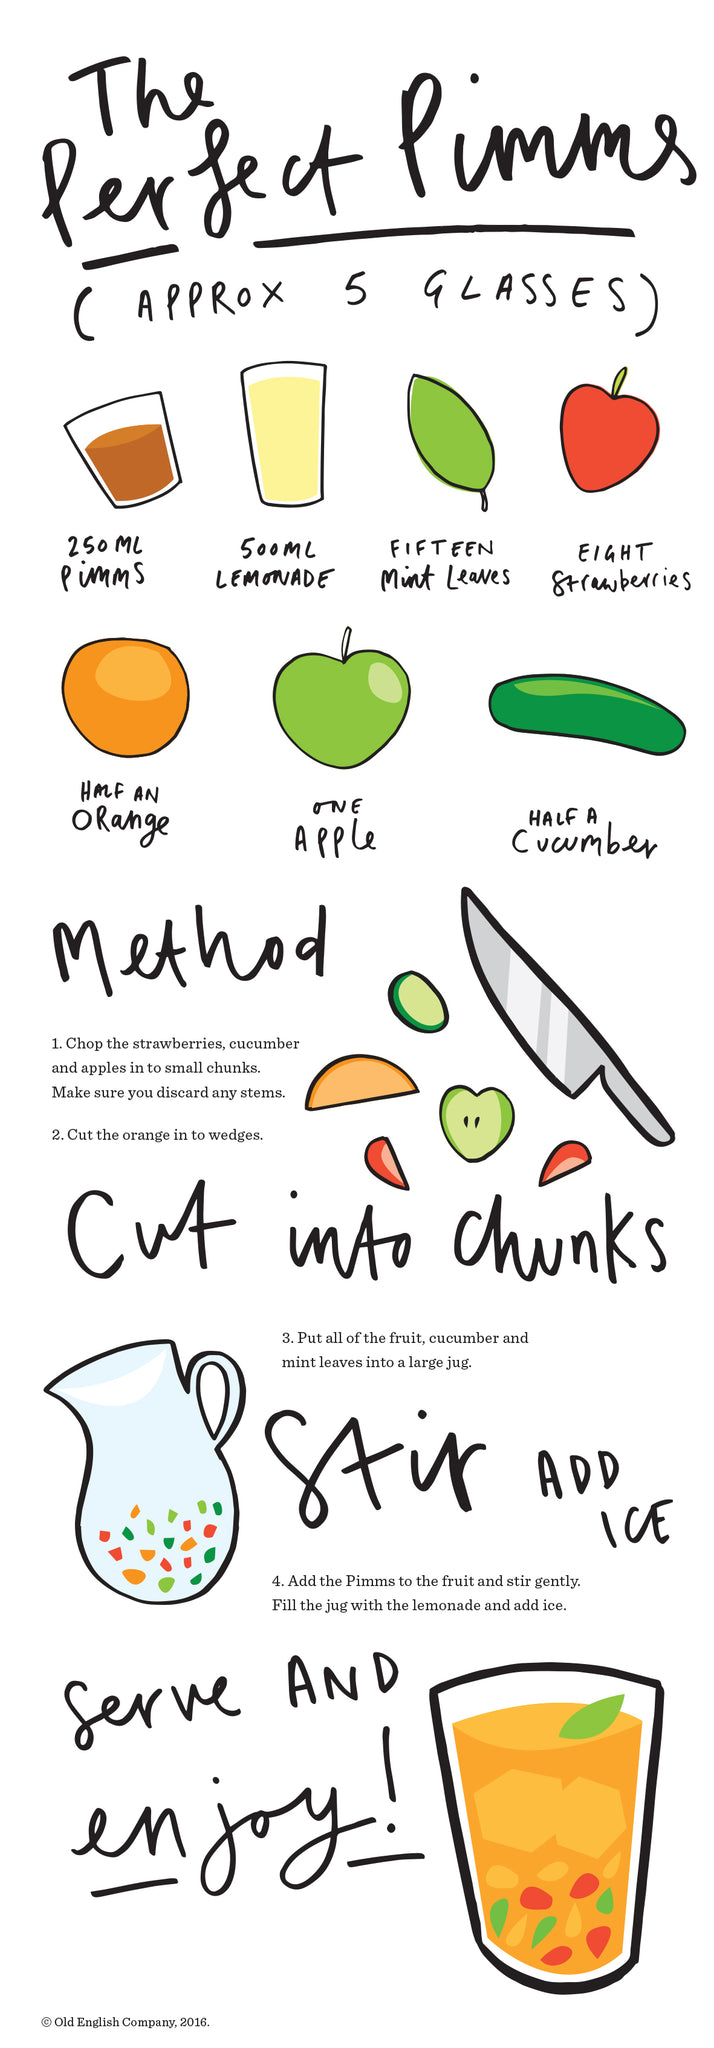 Perfect Pimms Recipe Infographic